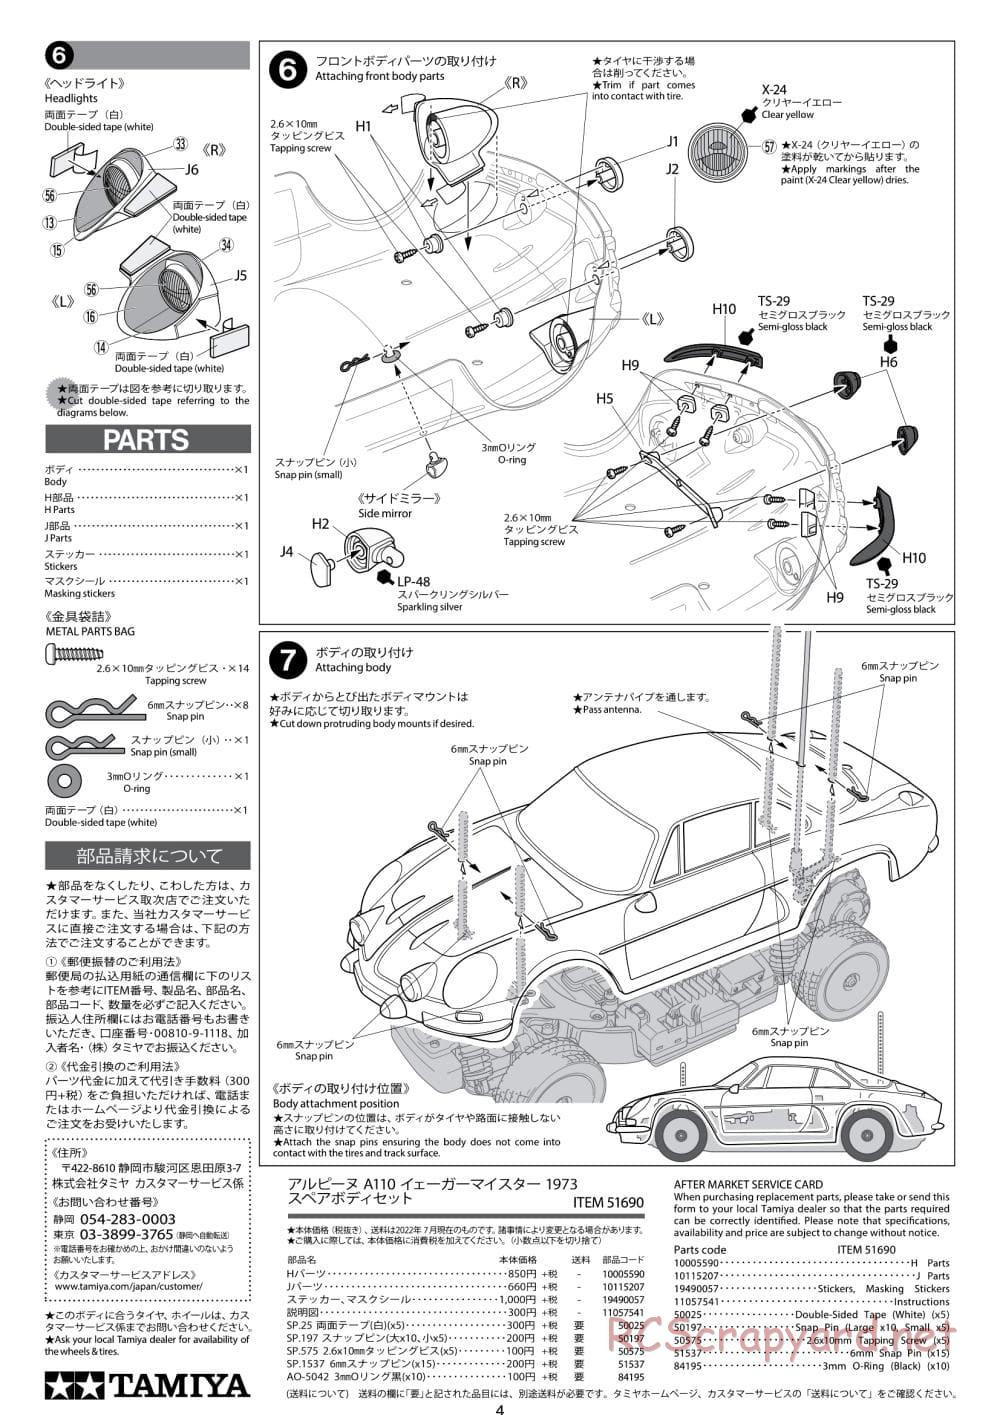 Tamiya - Alpine A110 Jagermeister 1973 - M-06 Chassis - Body Manual - Page 4